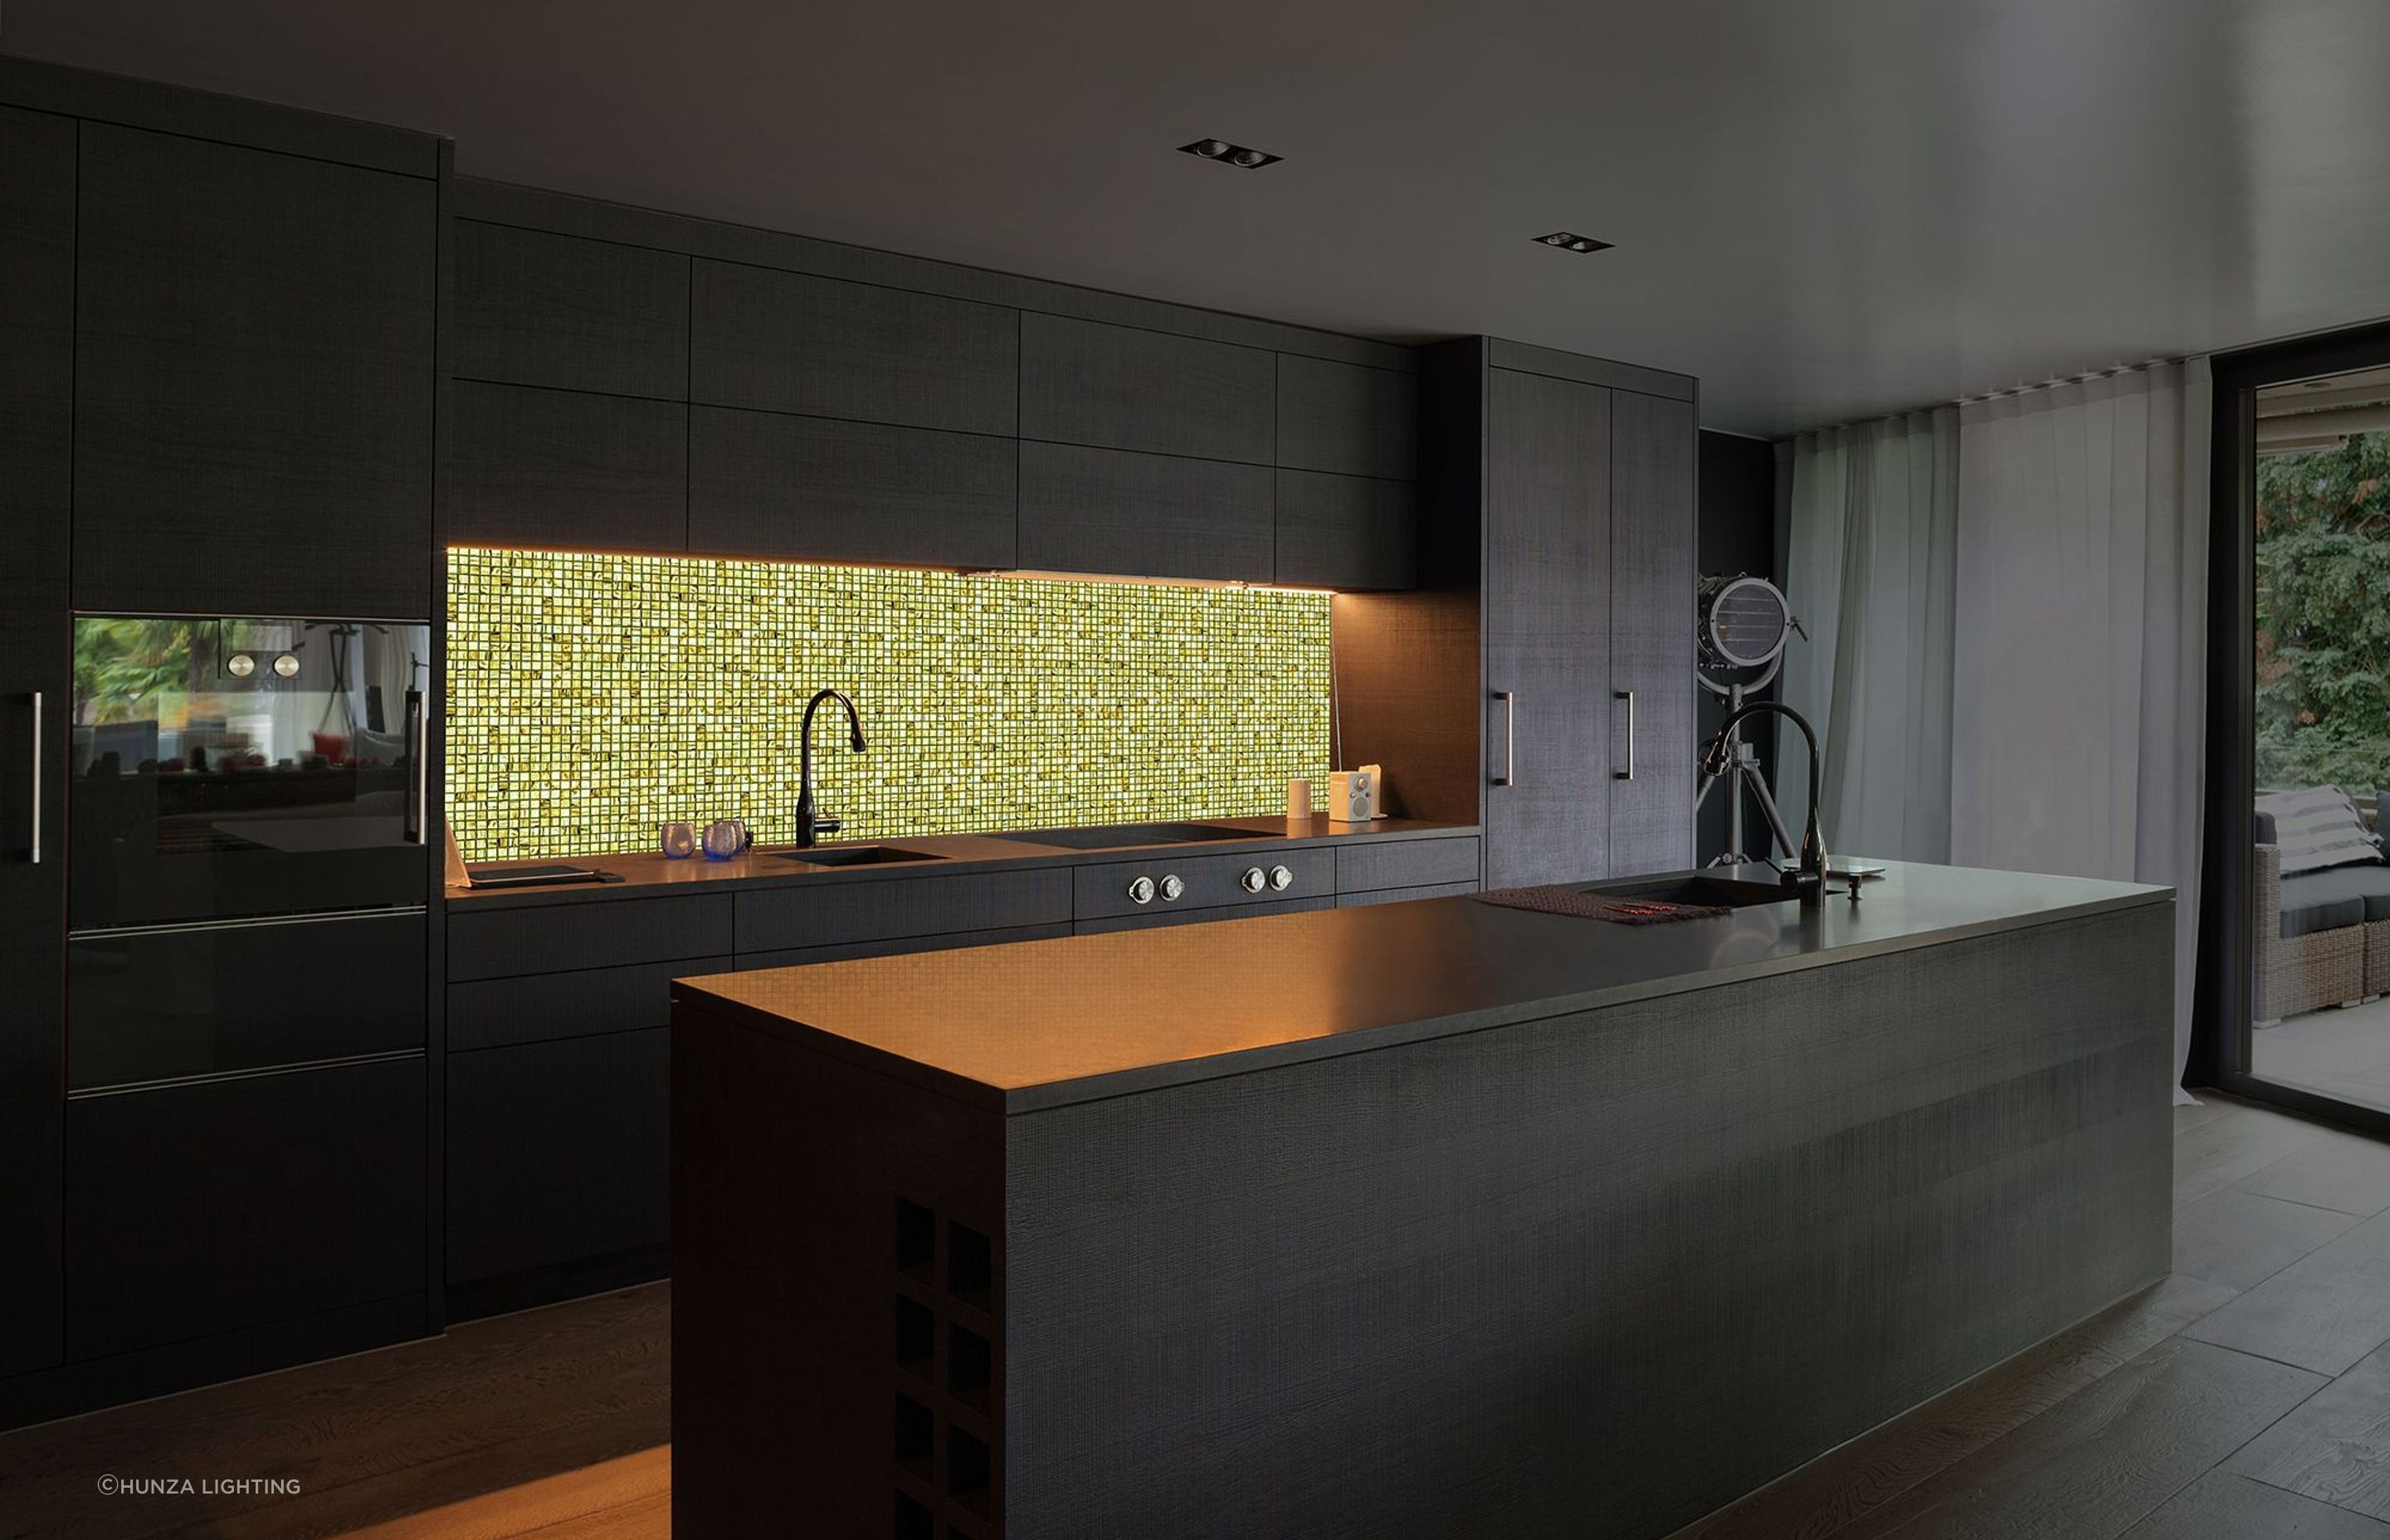 Volatiles combine LED technology with glass tiles to create an interactive light art experience for the home.